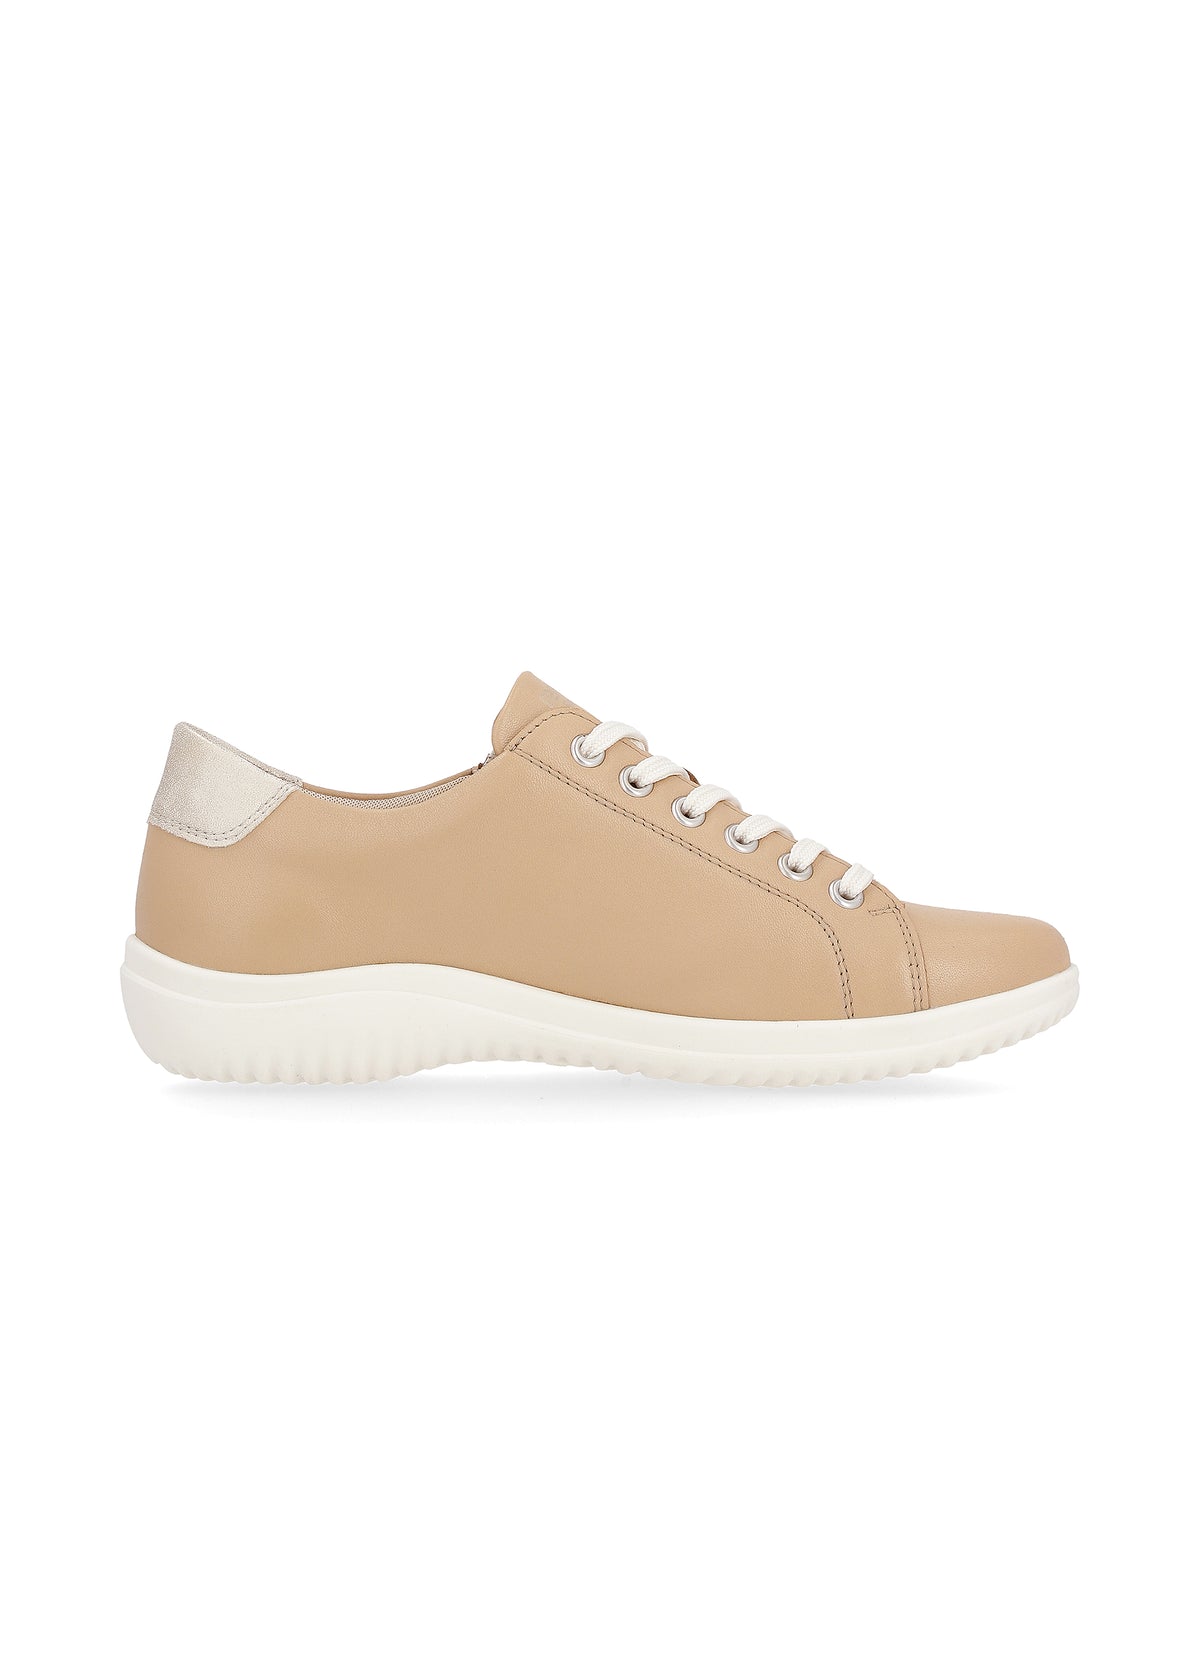 Lace-up Walking Shoes - light brown